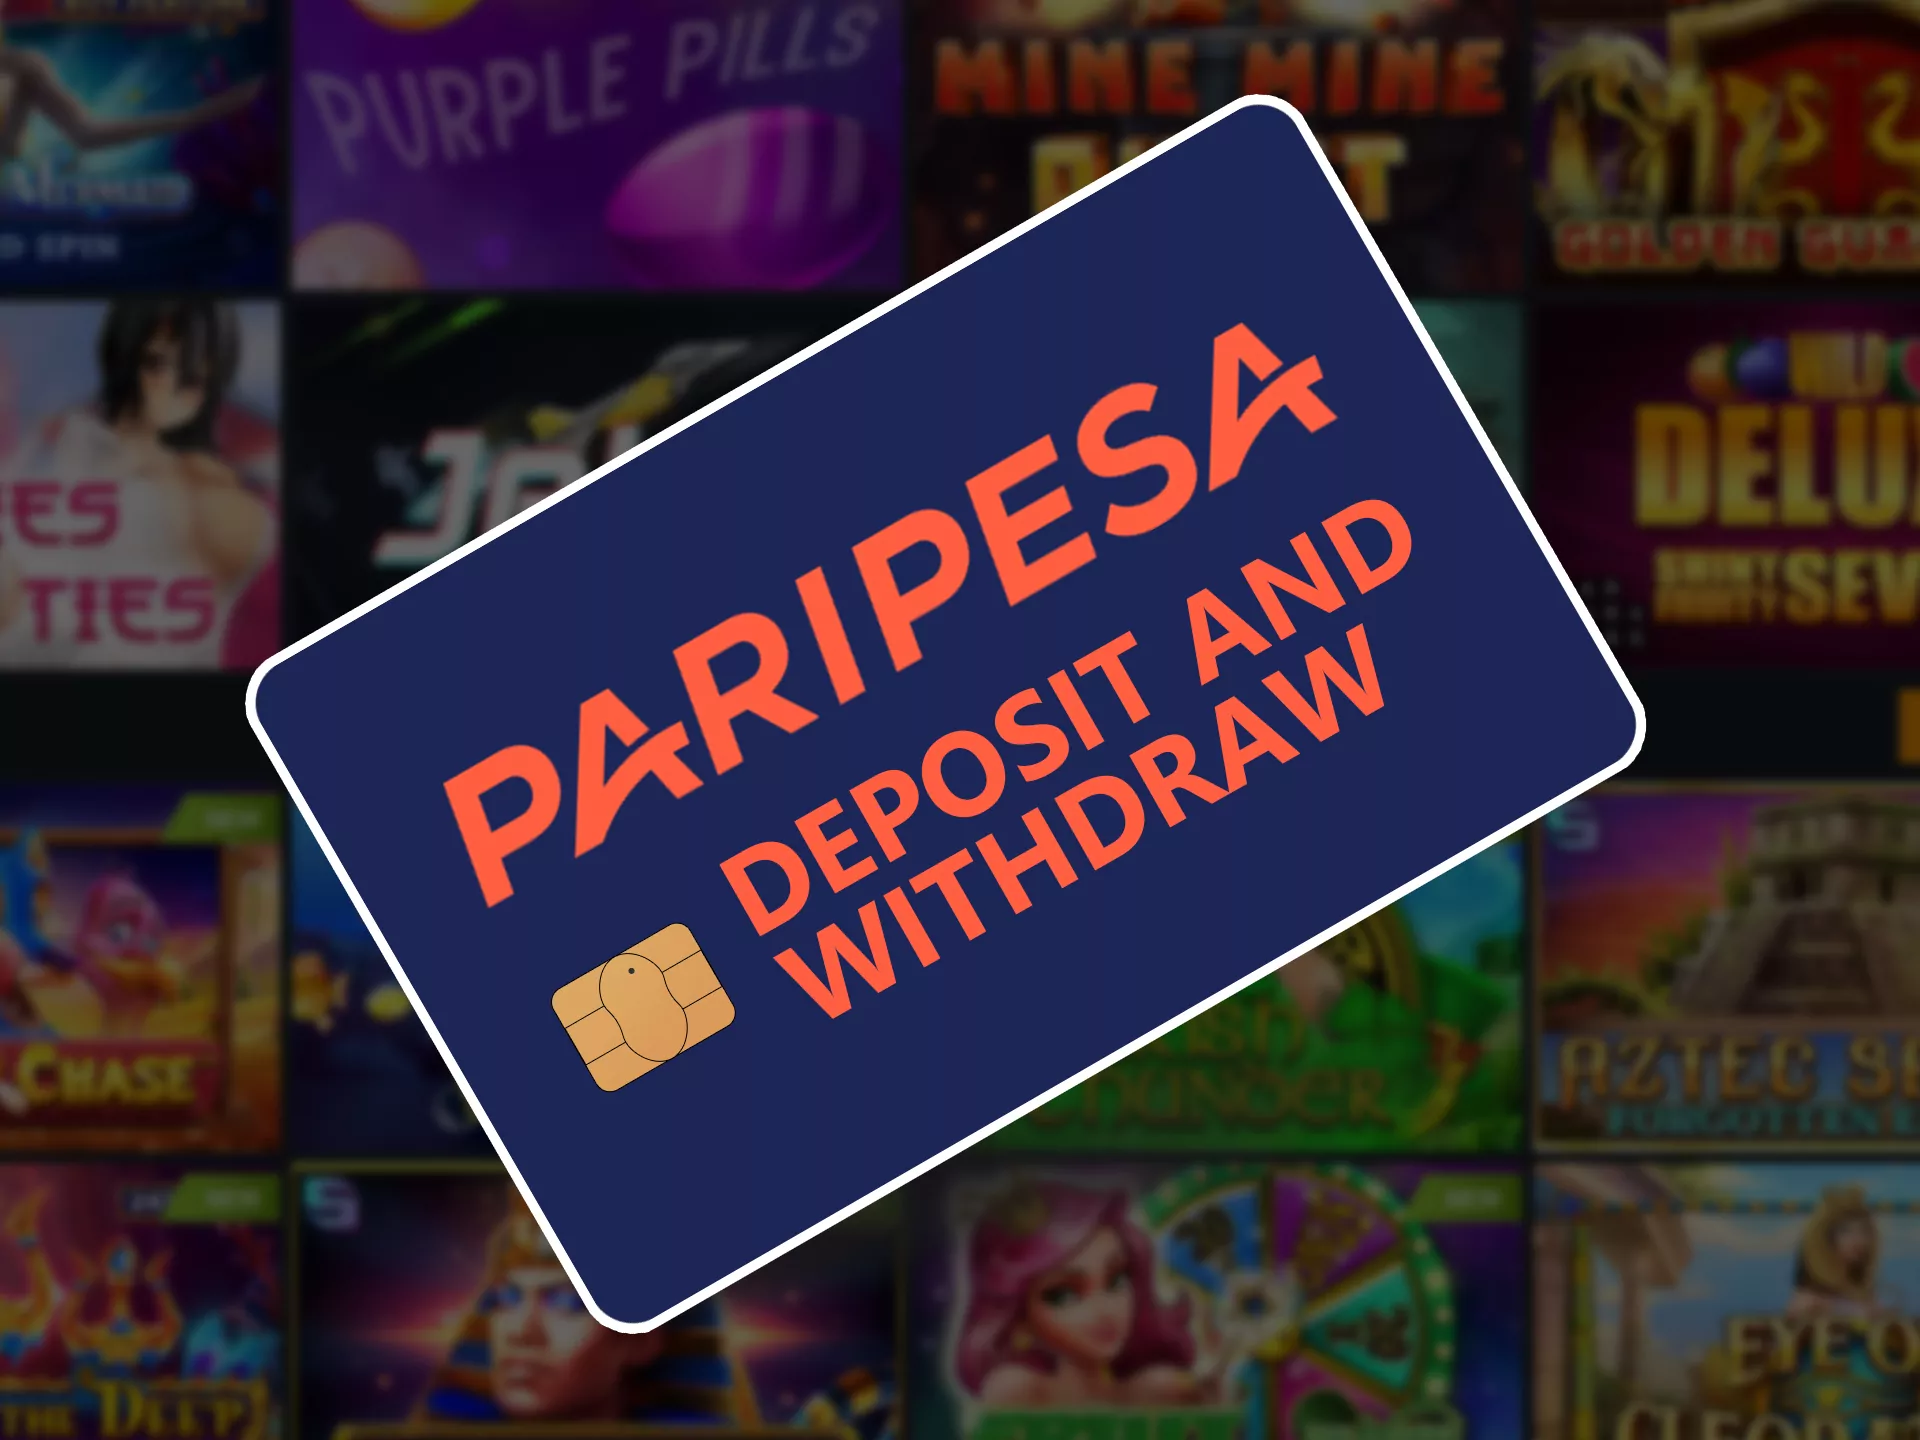 Deposit and withdraw money from Paripesa.